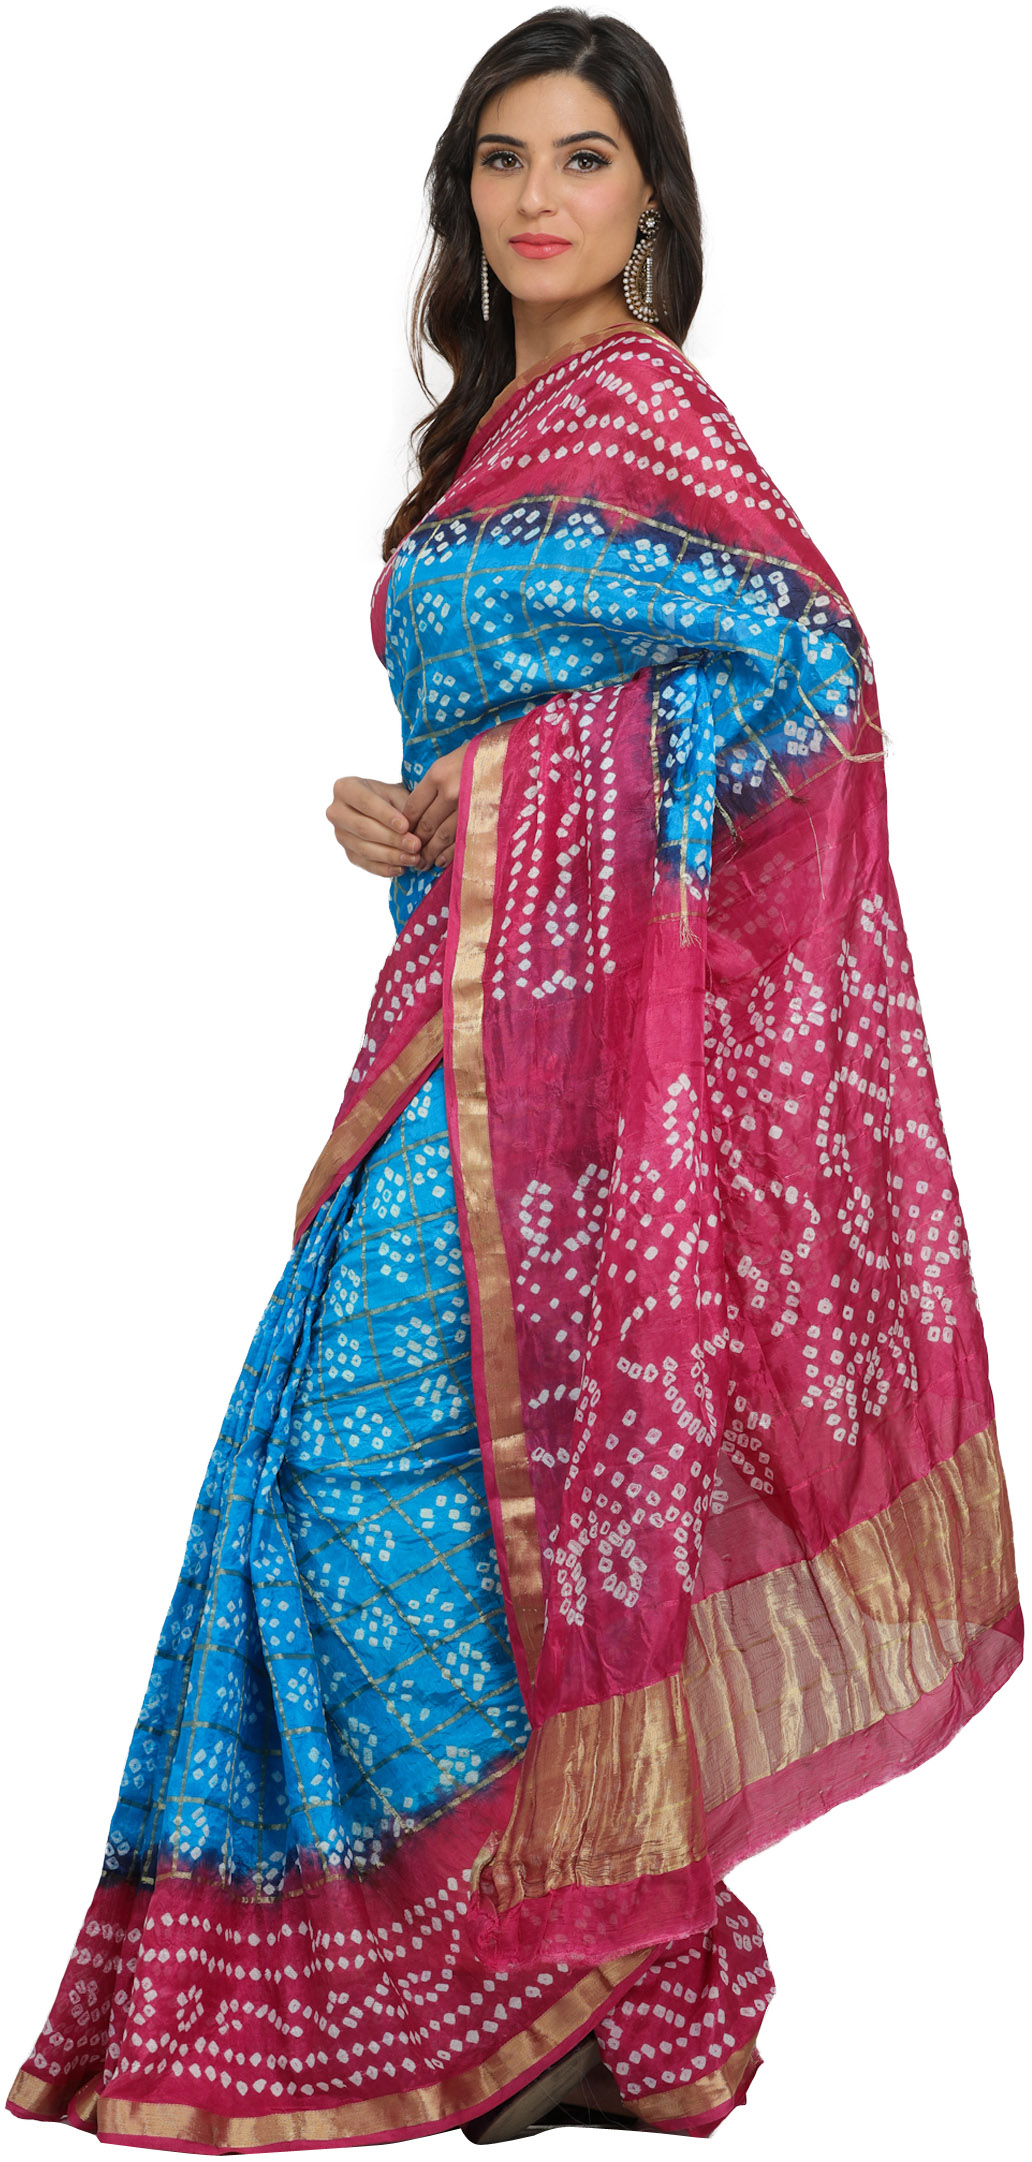 Pink and Blue Shaded Bandhani Gharchola Sari from Rajasthan with Gota ...